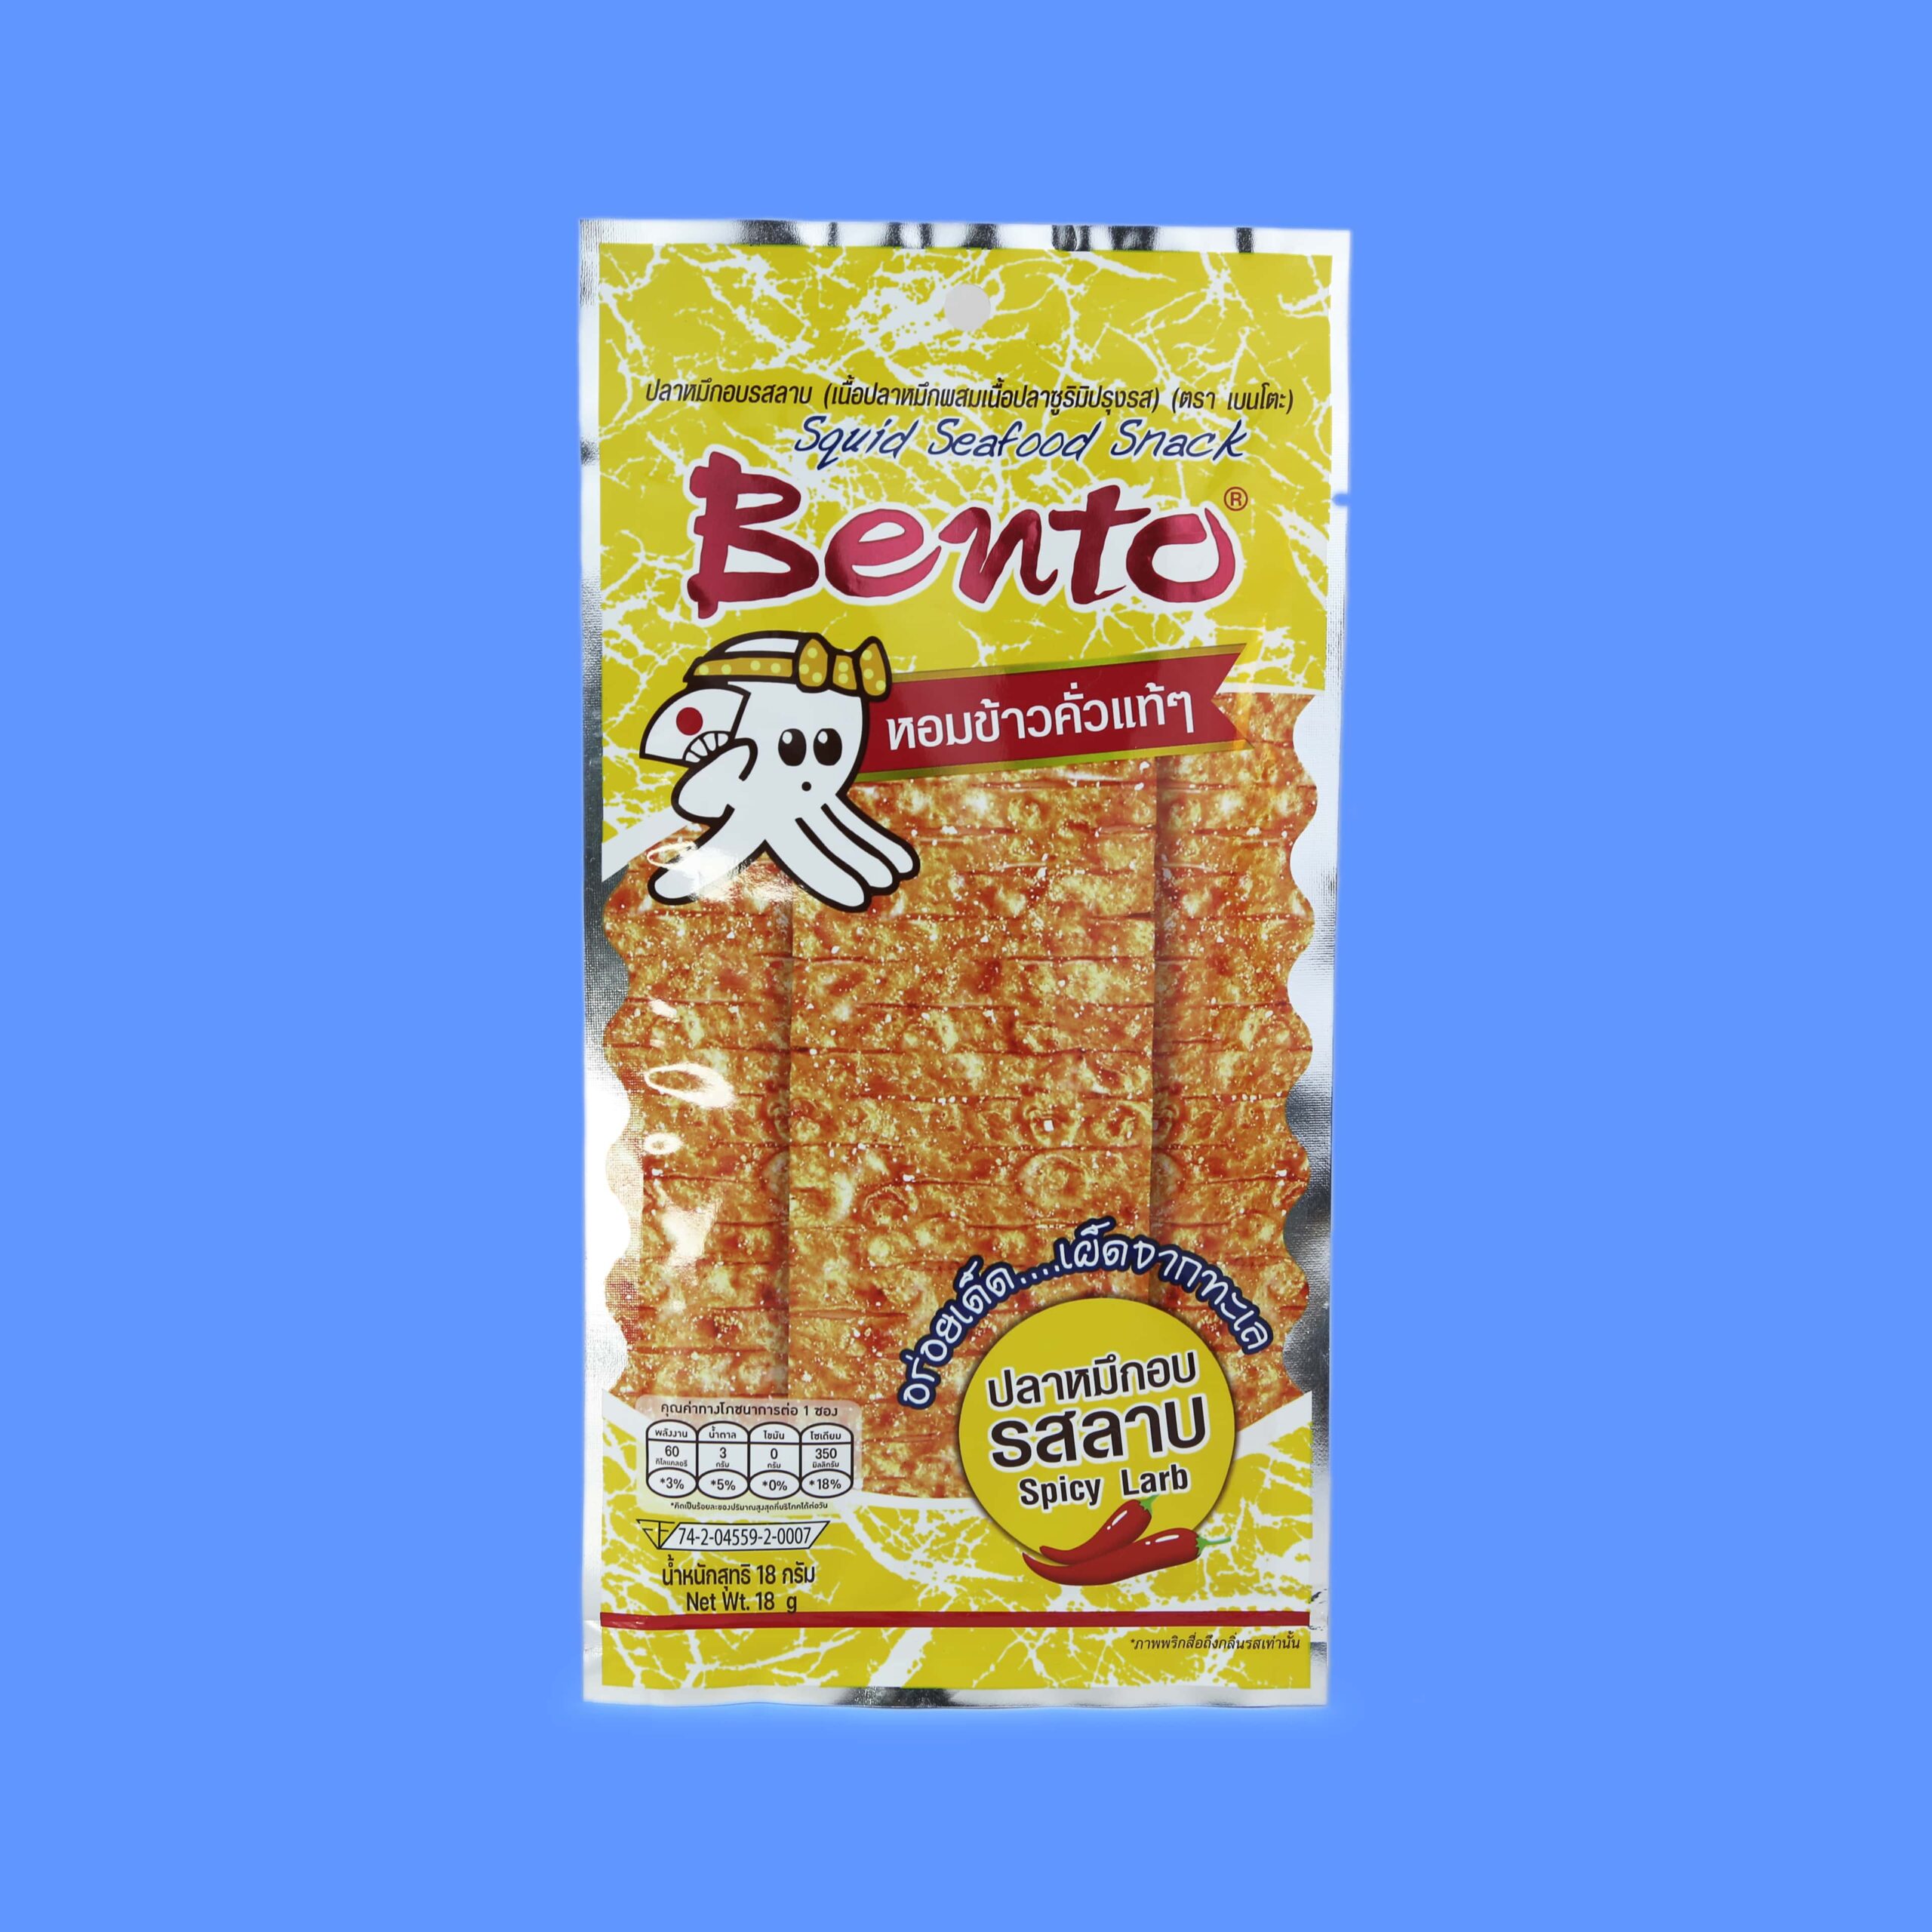 Bento spicy seafood snack larb flavor. Snack from Thailand in Heap Brand gift box